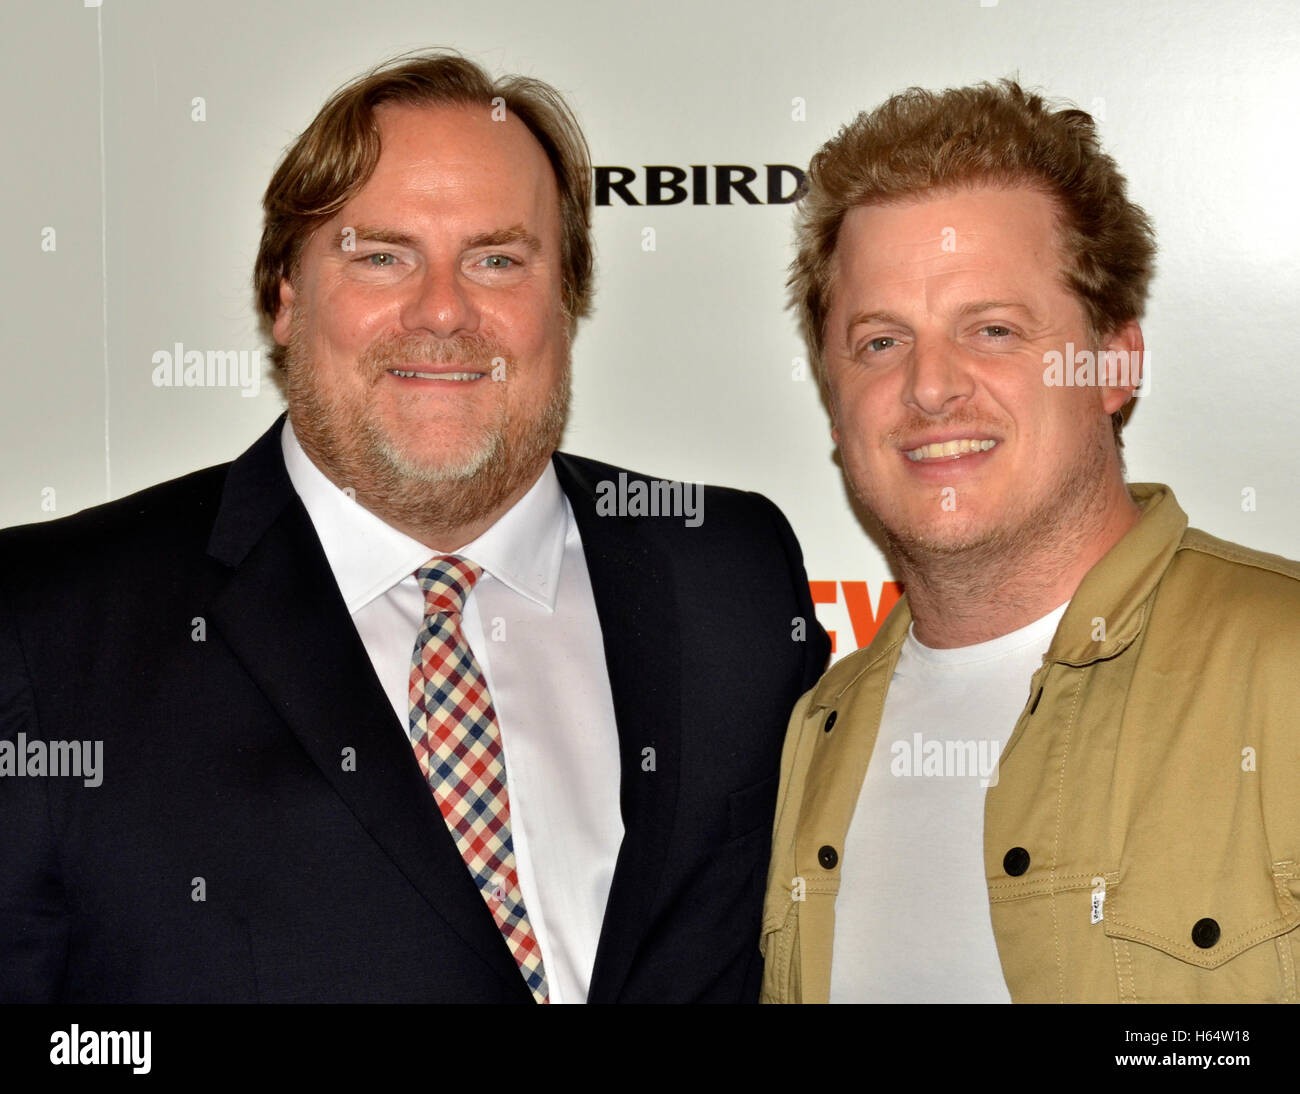 Kevin Farley (L) and Skyler Stone arrived at the Red Carpet Premiere of "I Am Chris Farley" at the Linwood Dunn Academy Theater Stock Photo